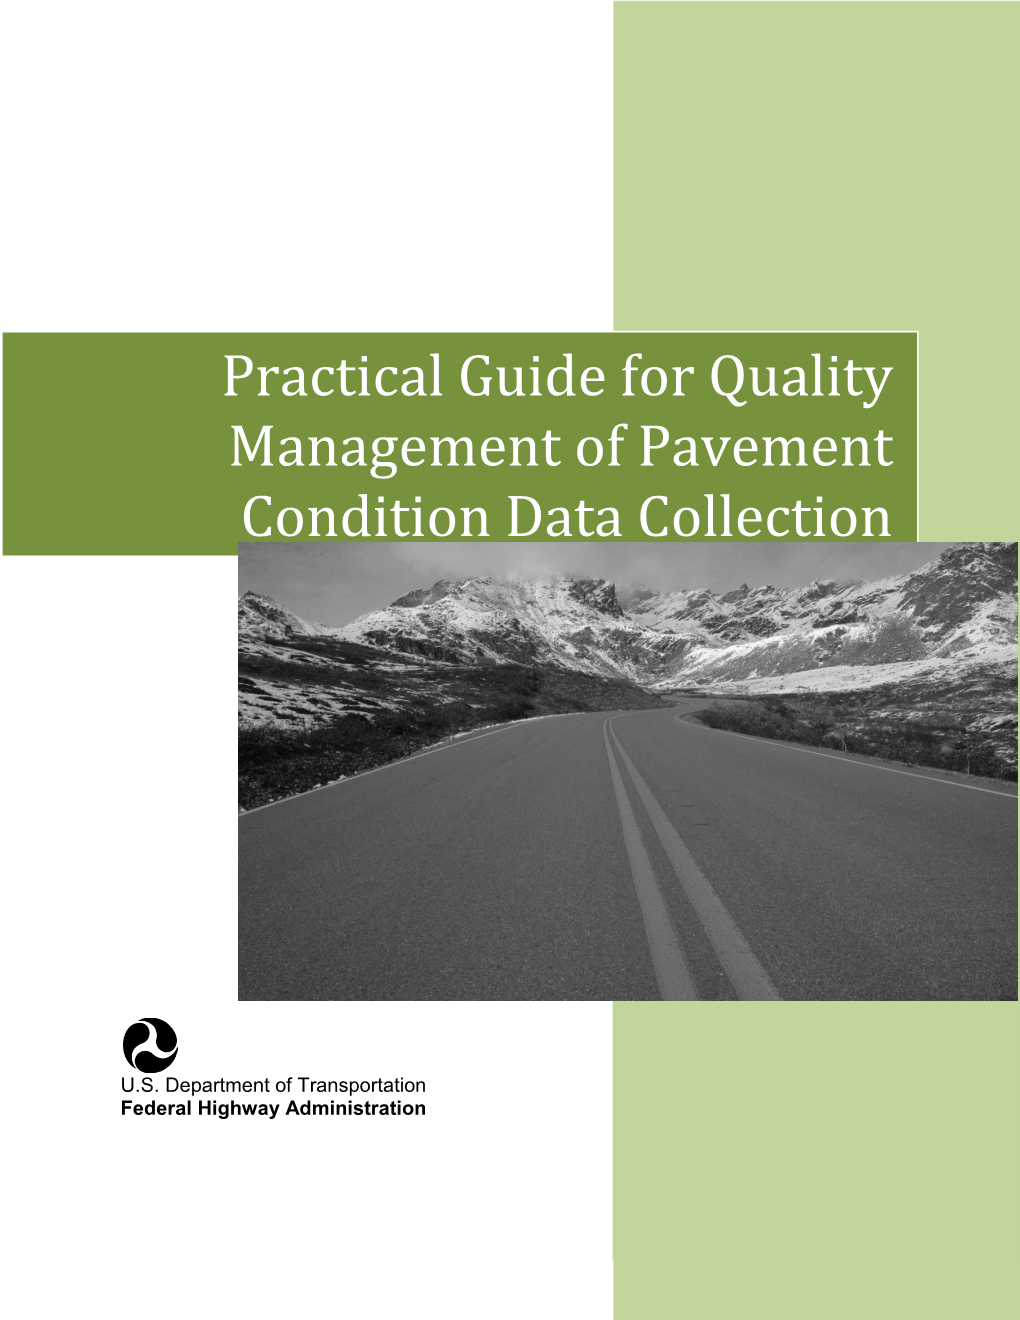 Practical Guide for Quality Management of Pavement Condition Data Collection February 2013 6